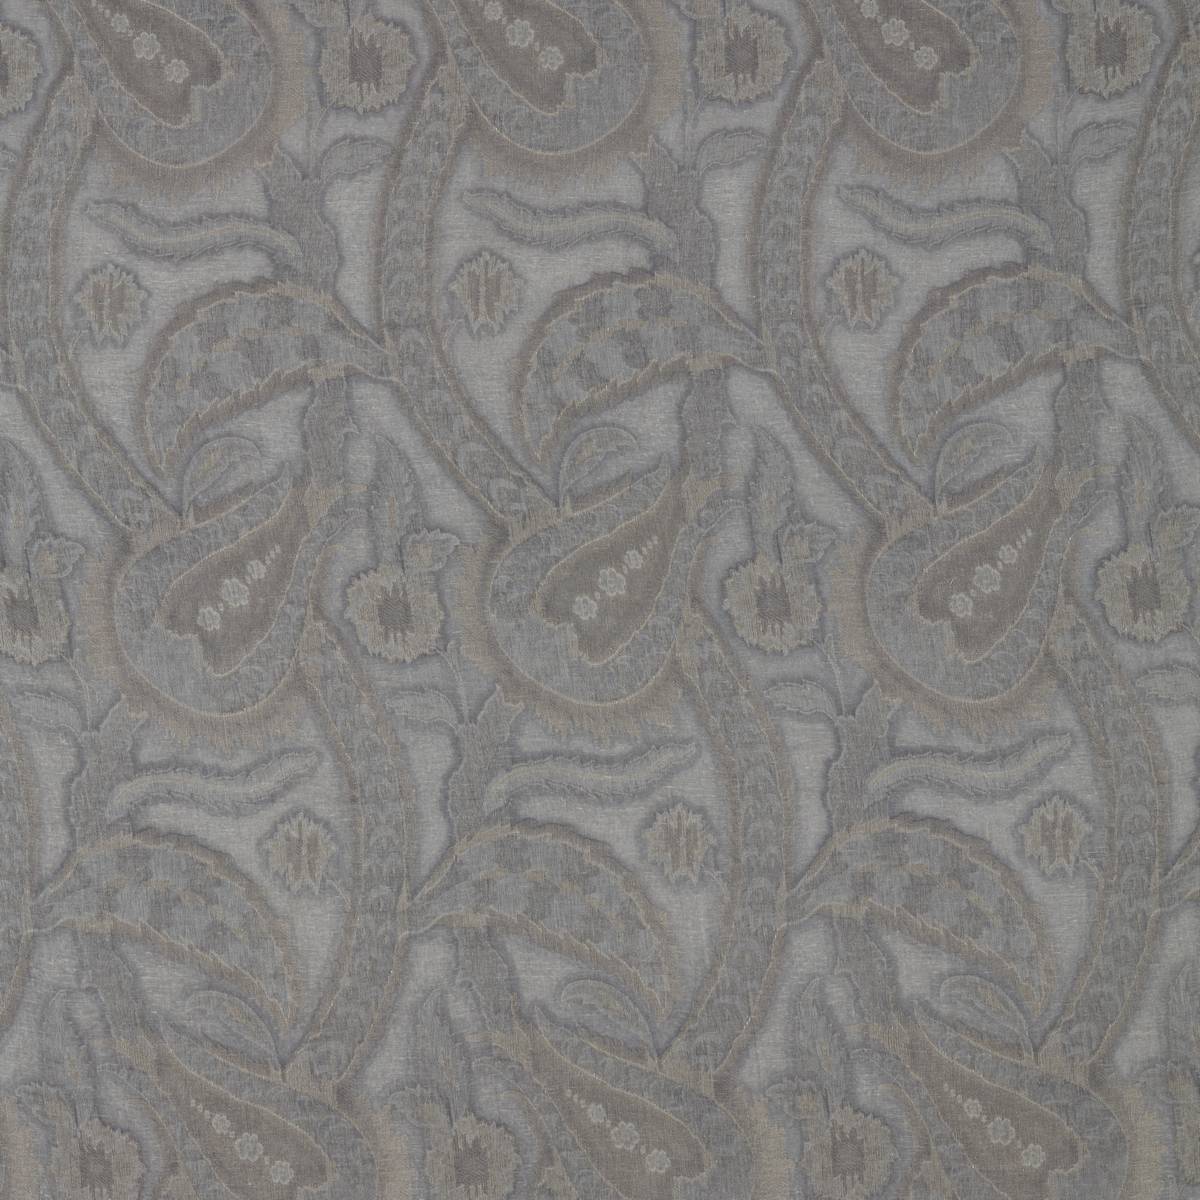 Oberon Anthracite Fabric by Zoffany